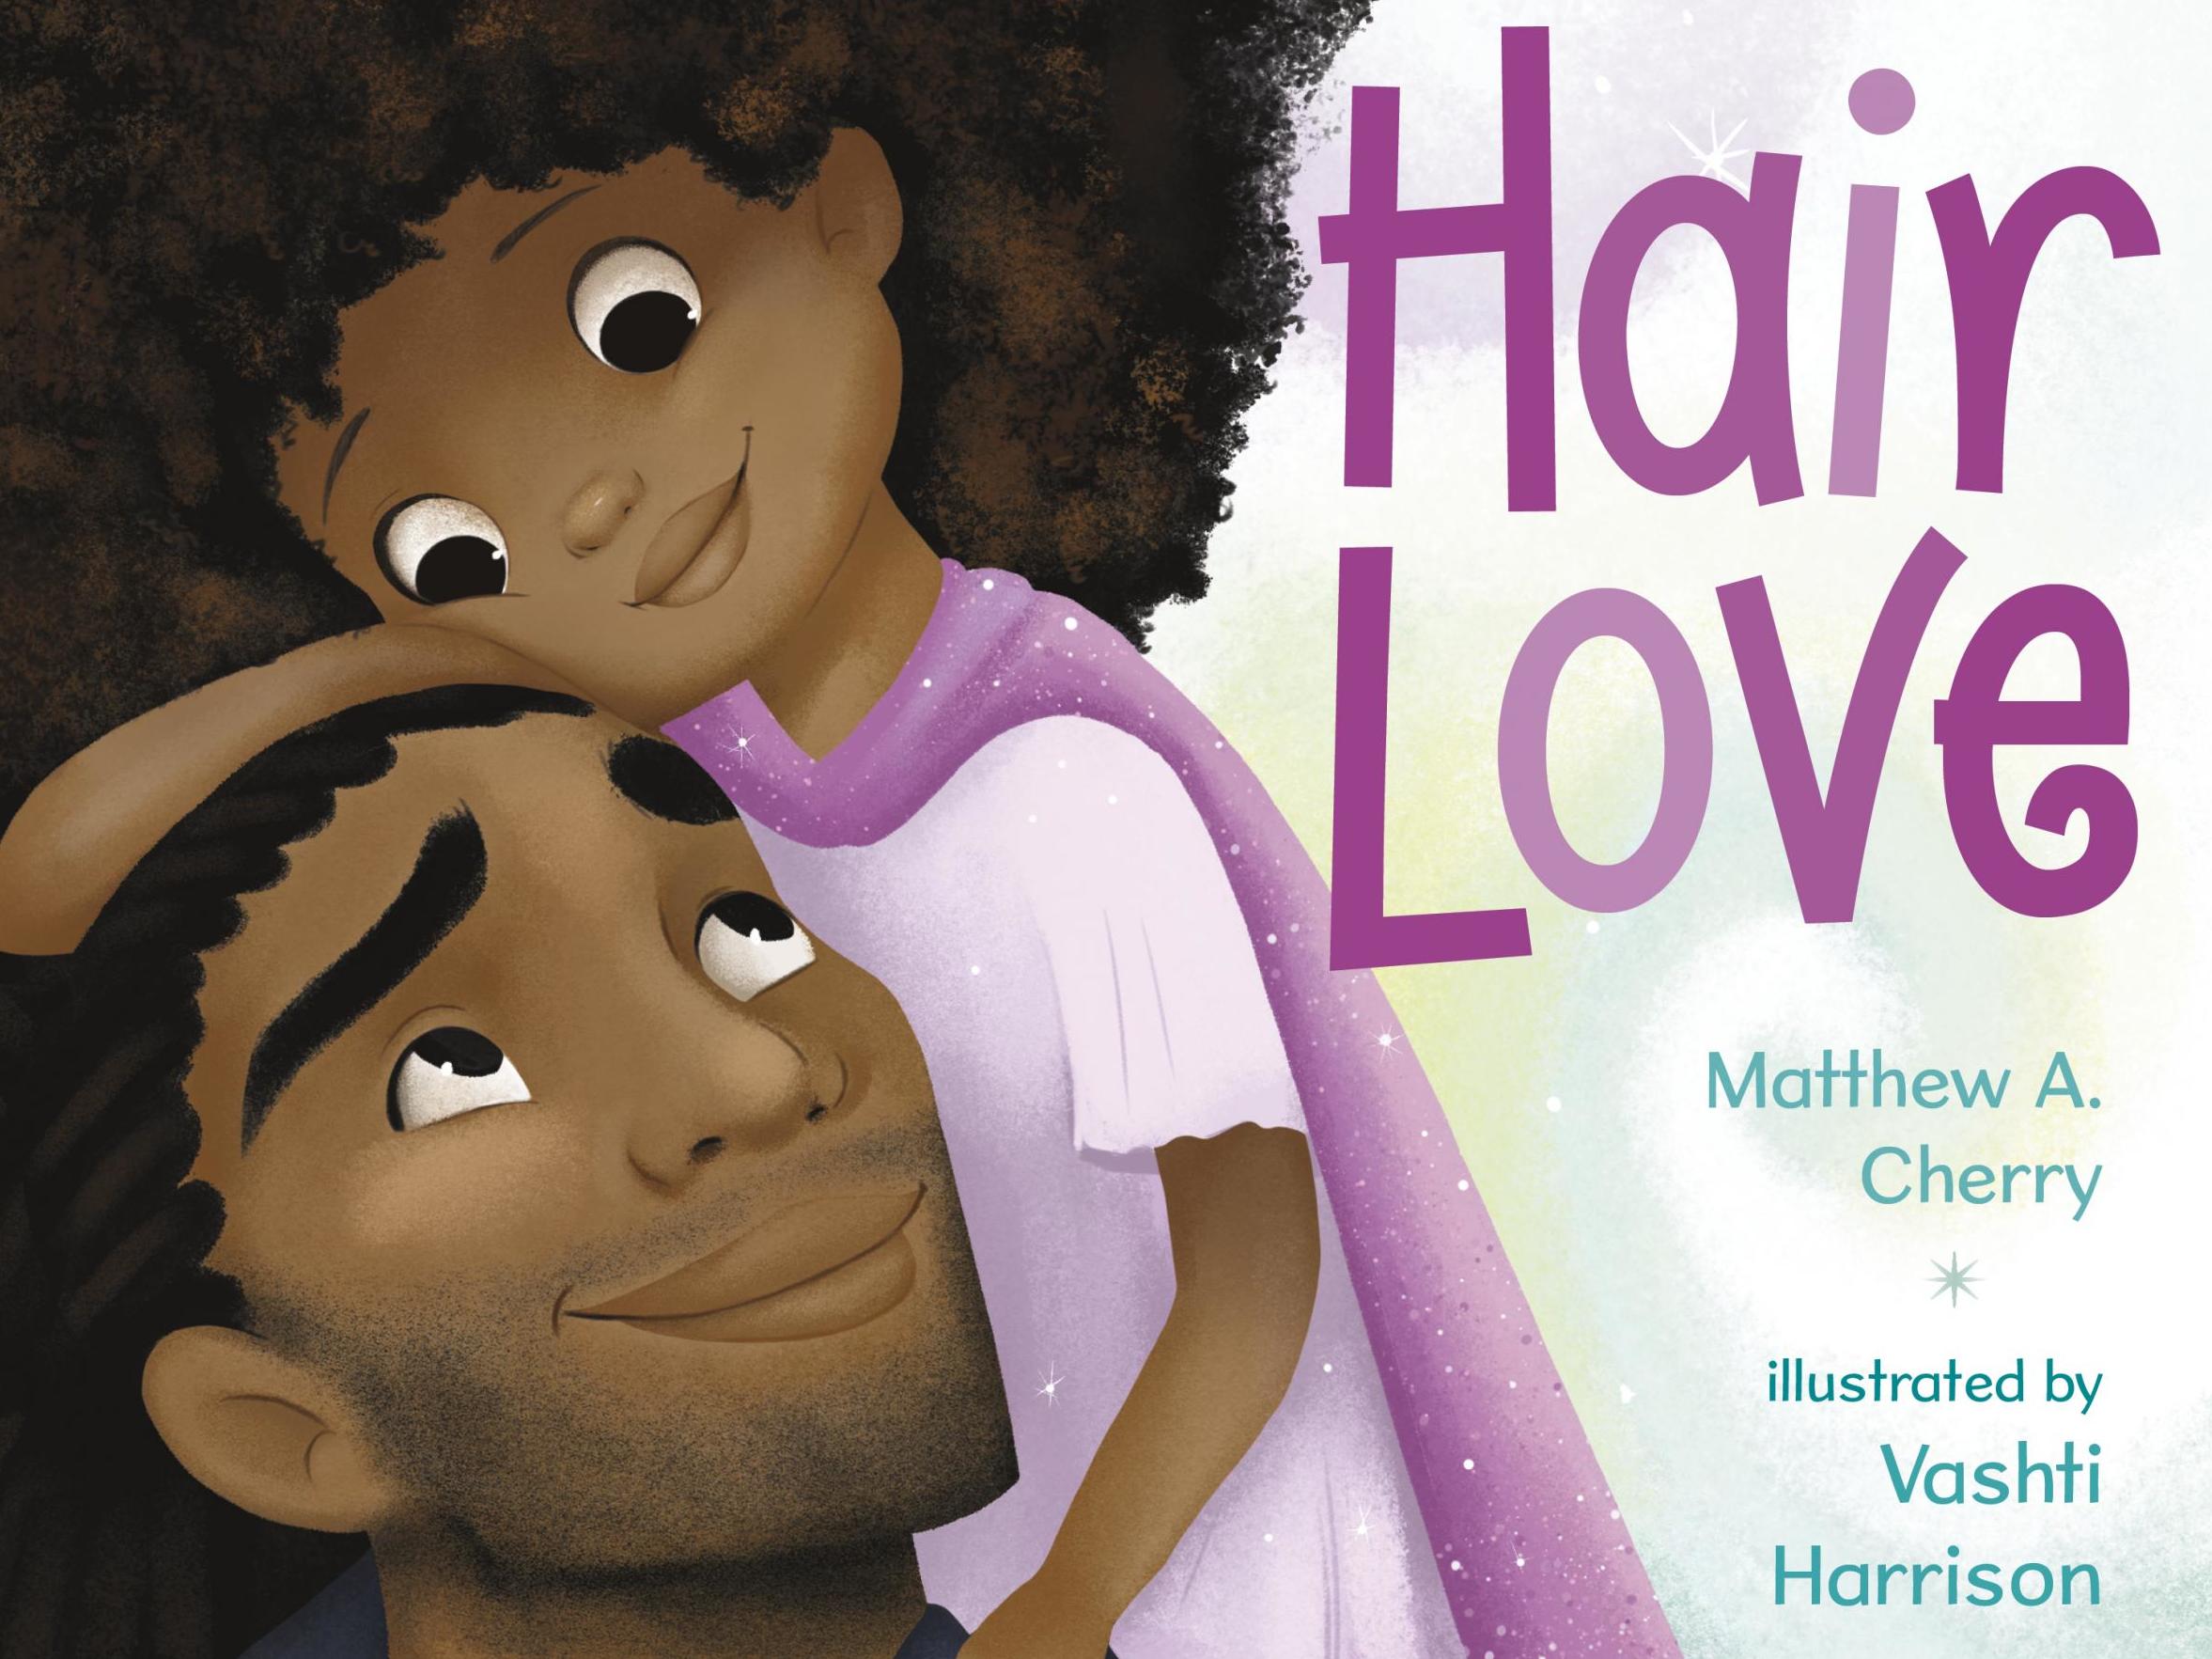 'Hair Love', by Matthew A. Cherry and illustrated by Vashti Harrison